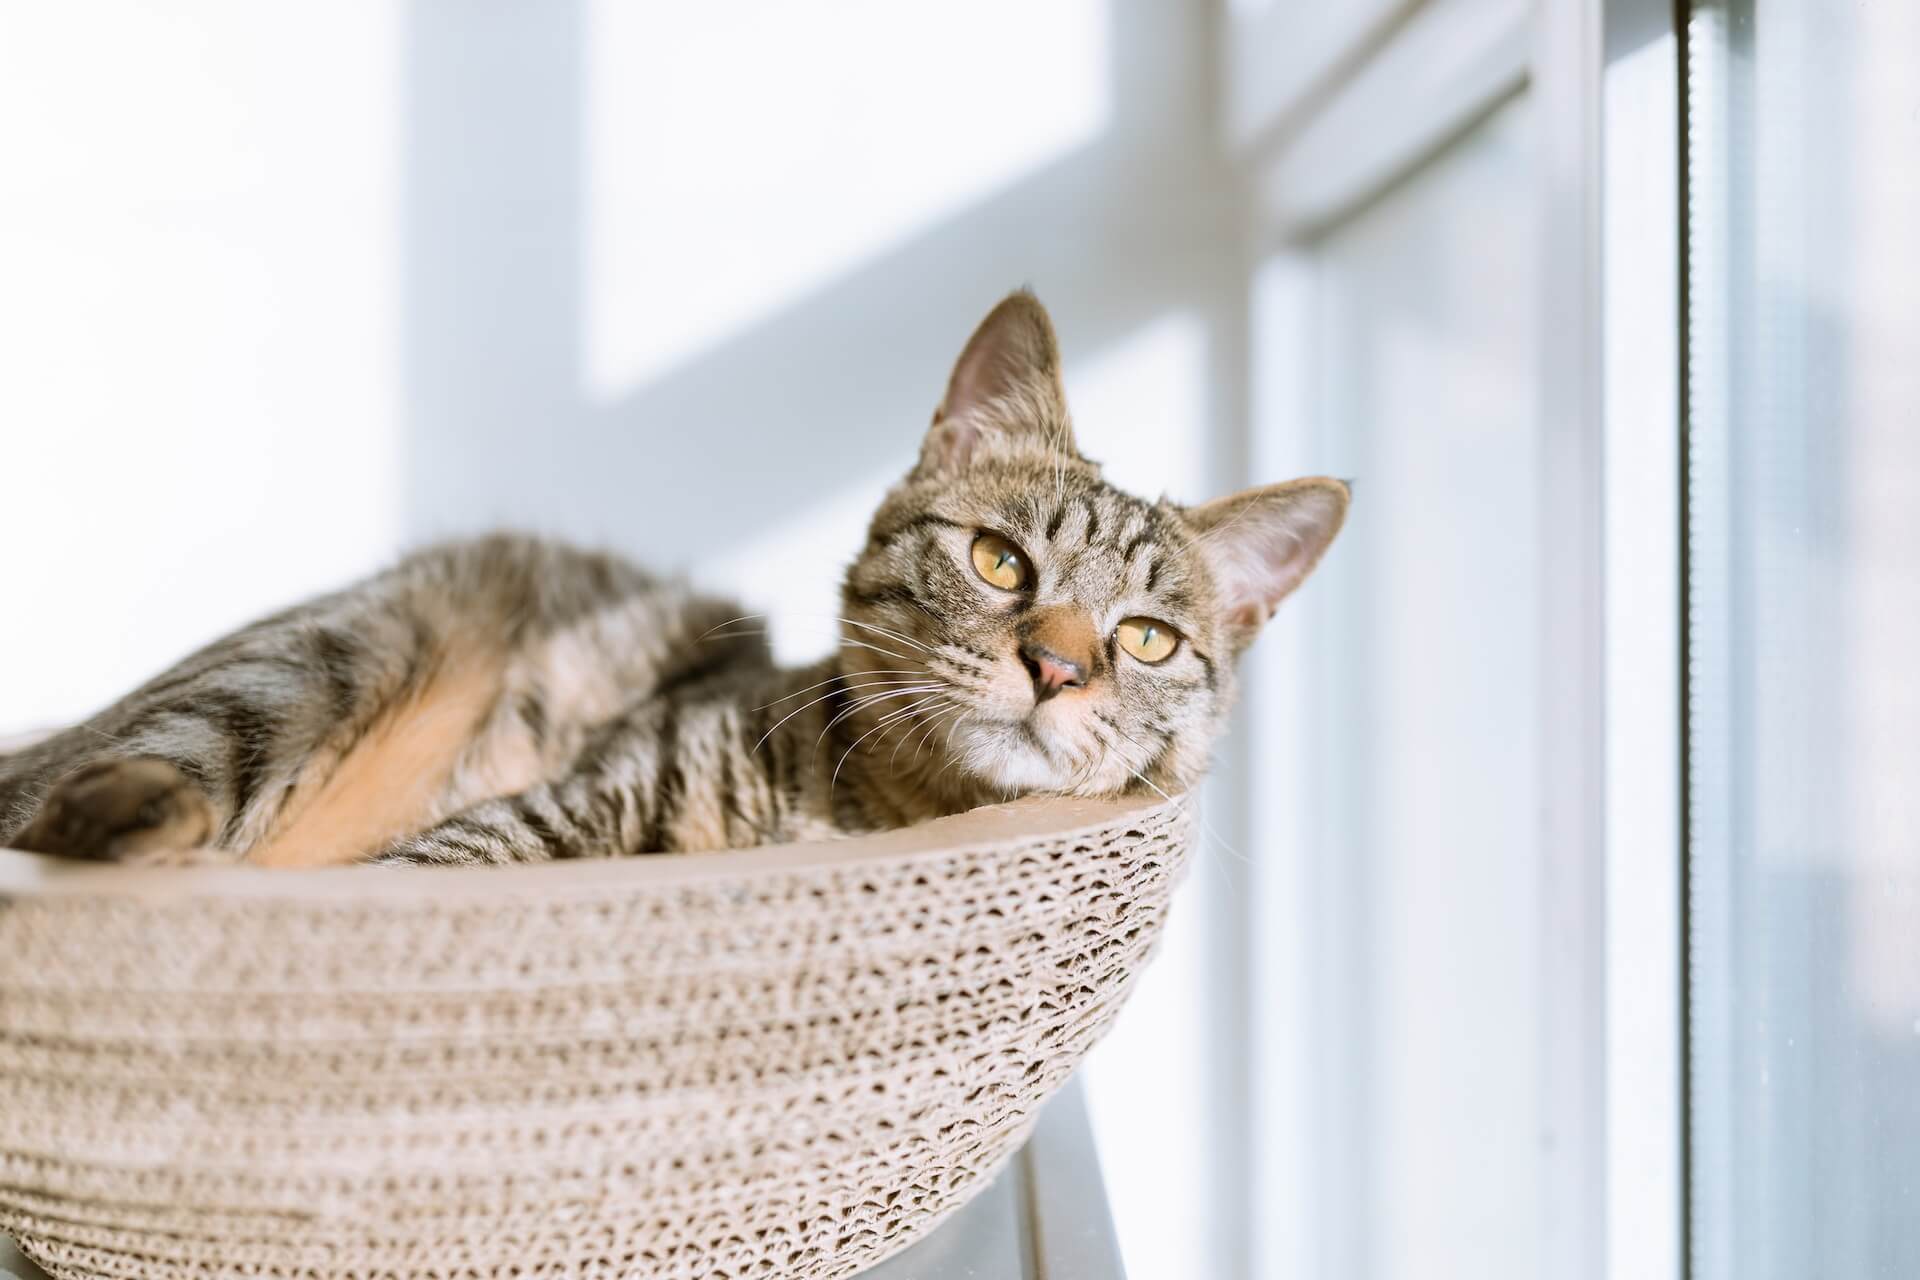 How to Build a Catio: A Guide for the Purr-fect DIY Project